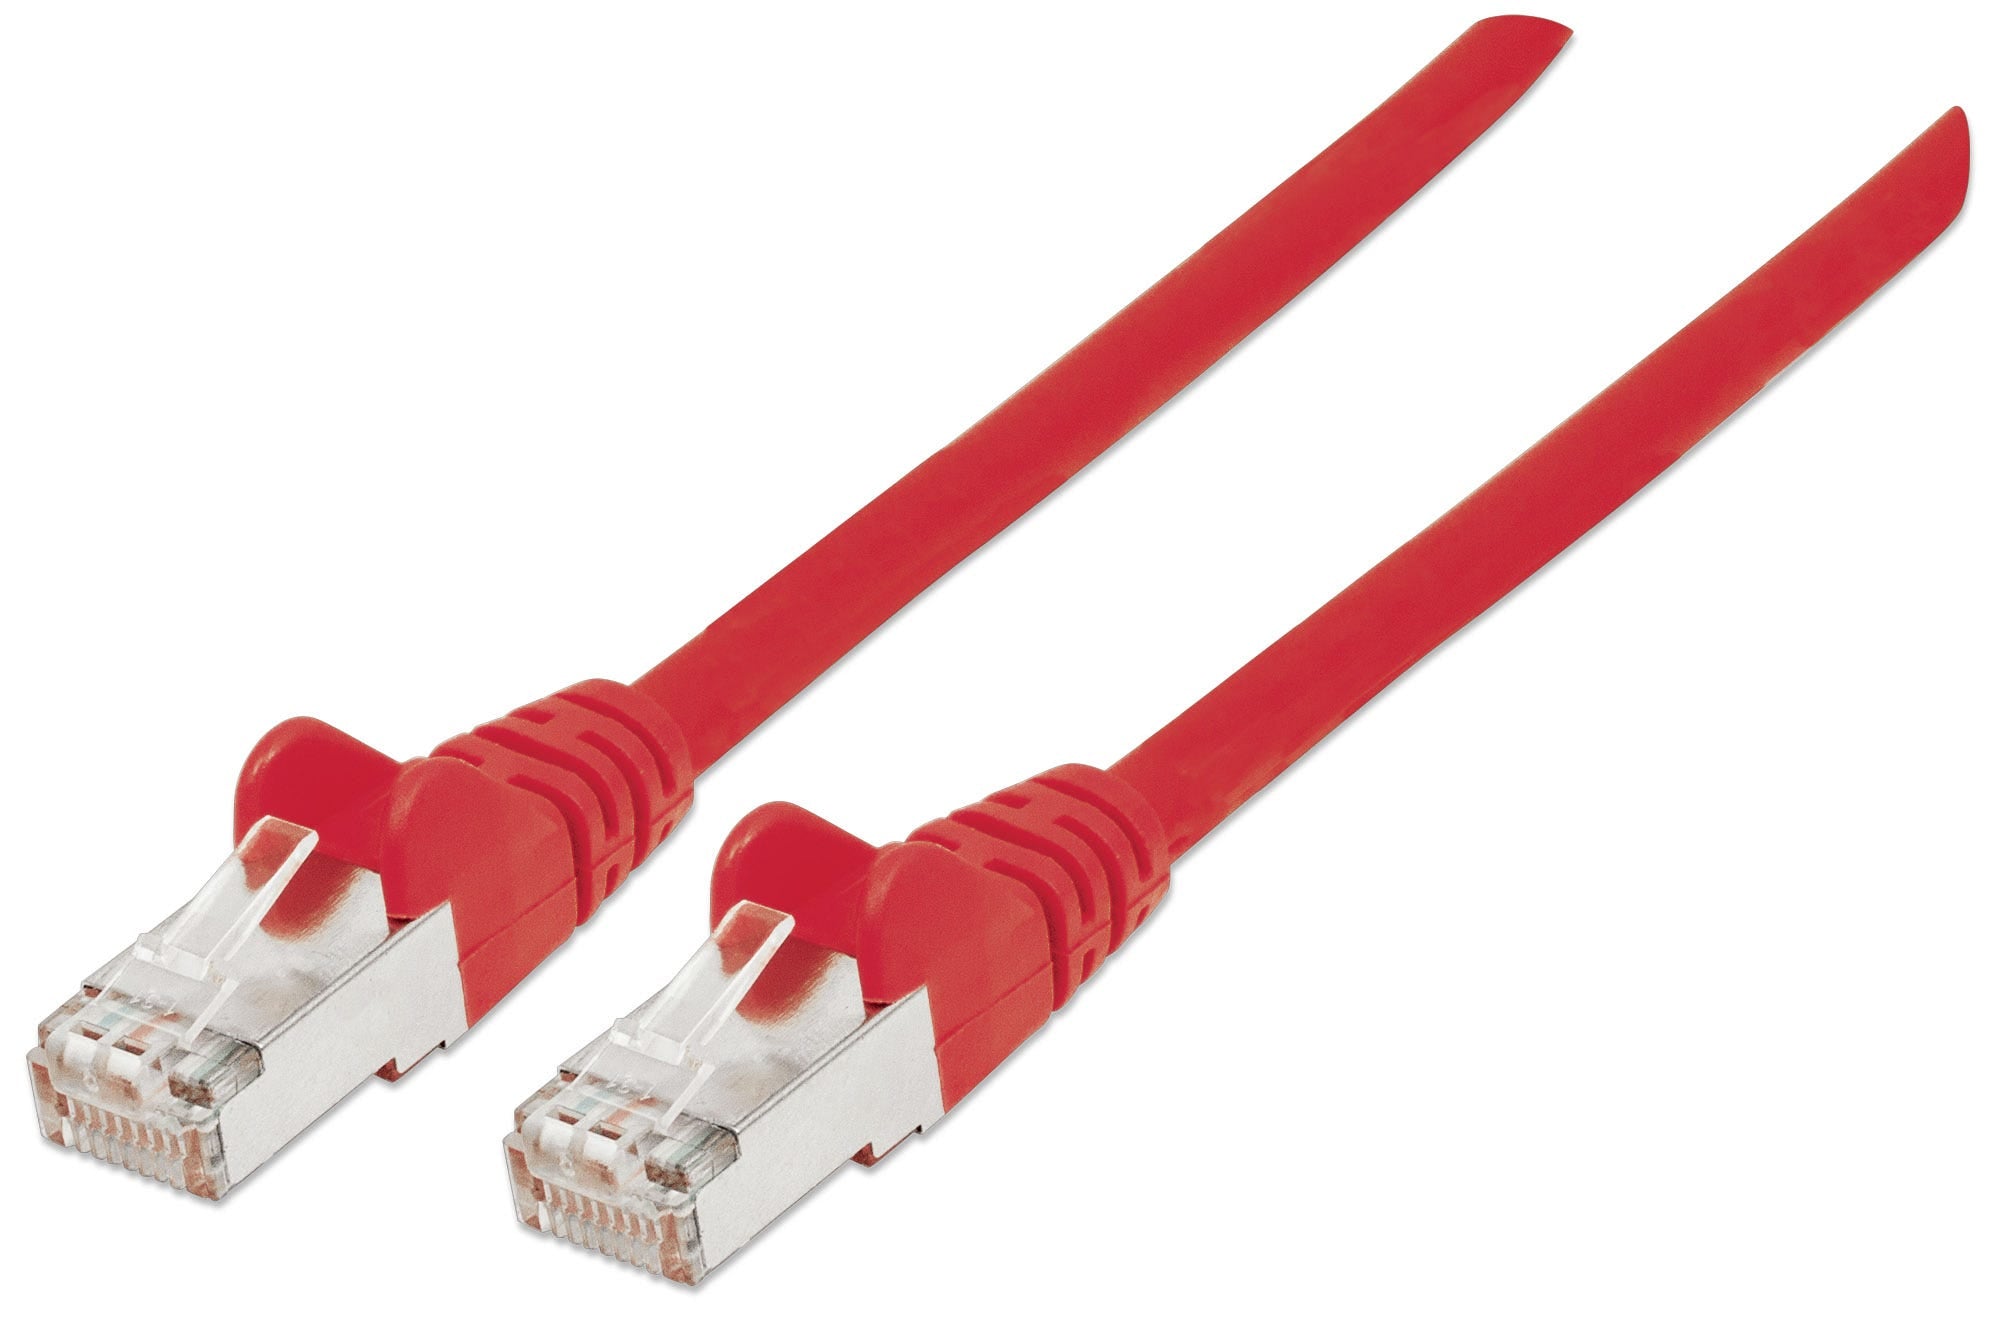 Intellinet Network Patch Cable, Cat6, 3m, Red, Copper, S/FTP, LSOH / LSZH, PVC, RJ45, Gold Plated Contacts, Snagless, Booted, Lifetime Warranty, Polybag